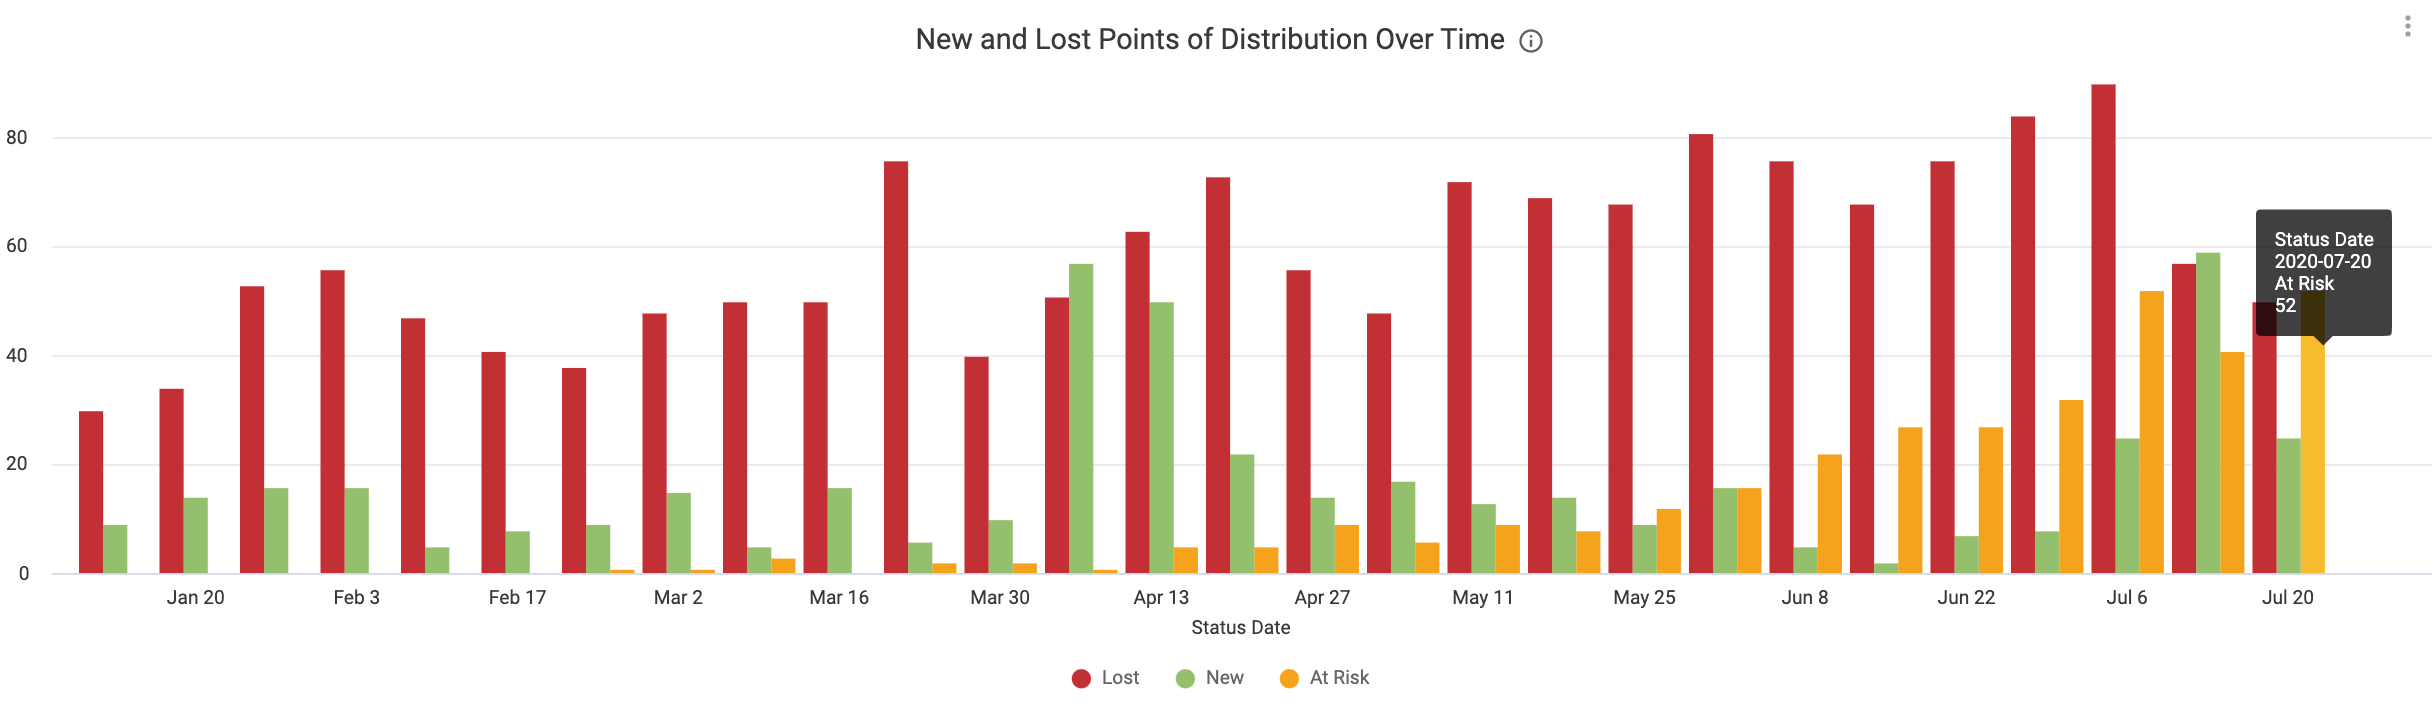 New_and_Lost_Points_of_Distribution_Over_Time.png